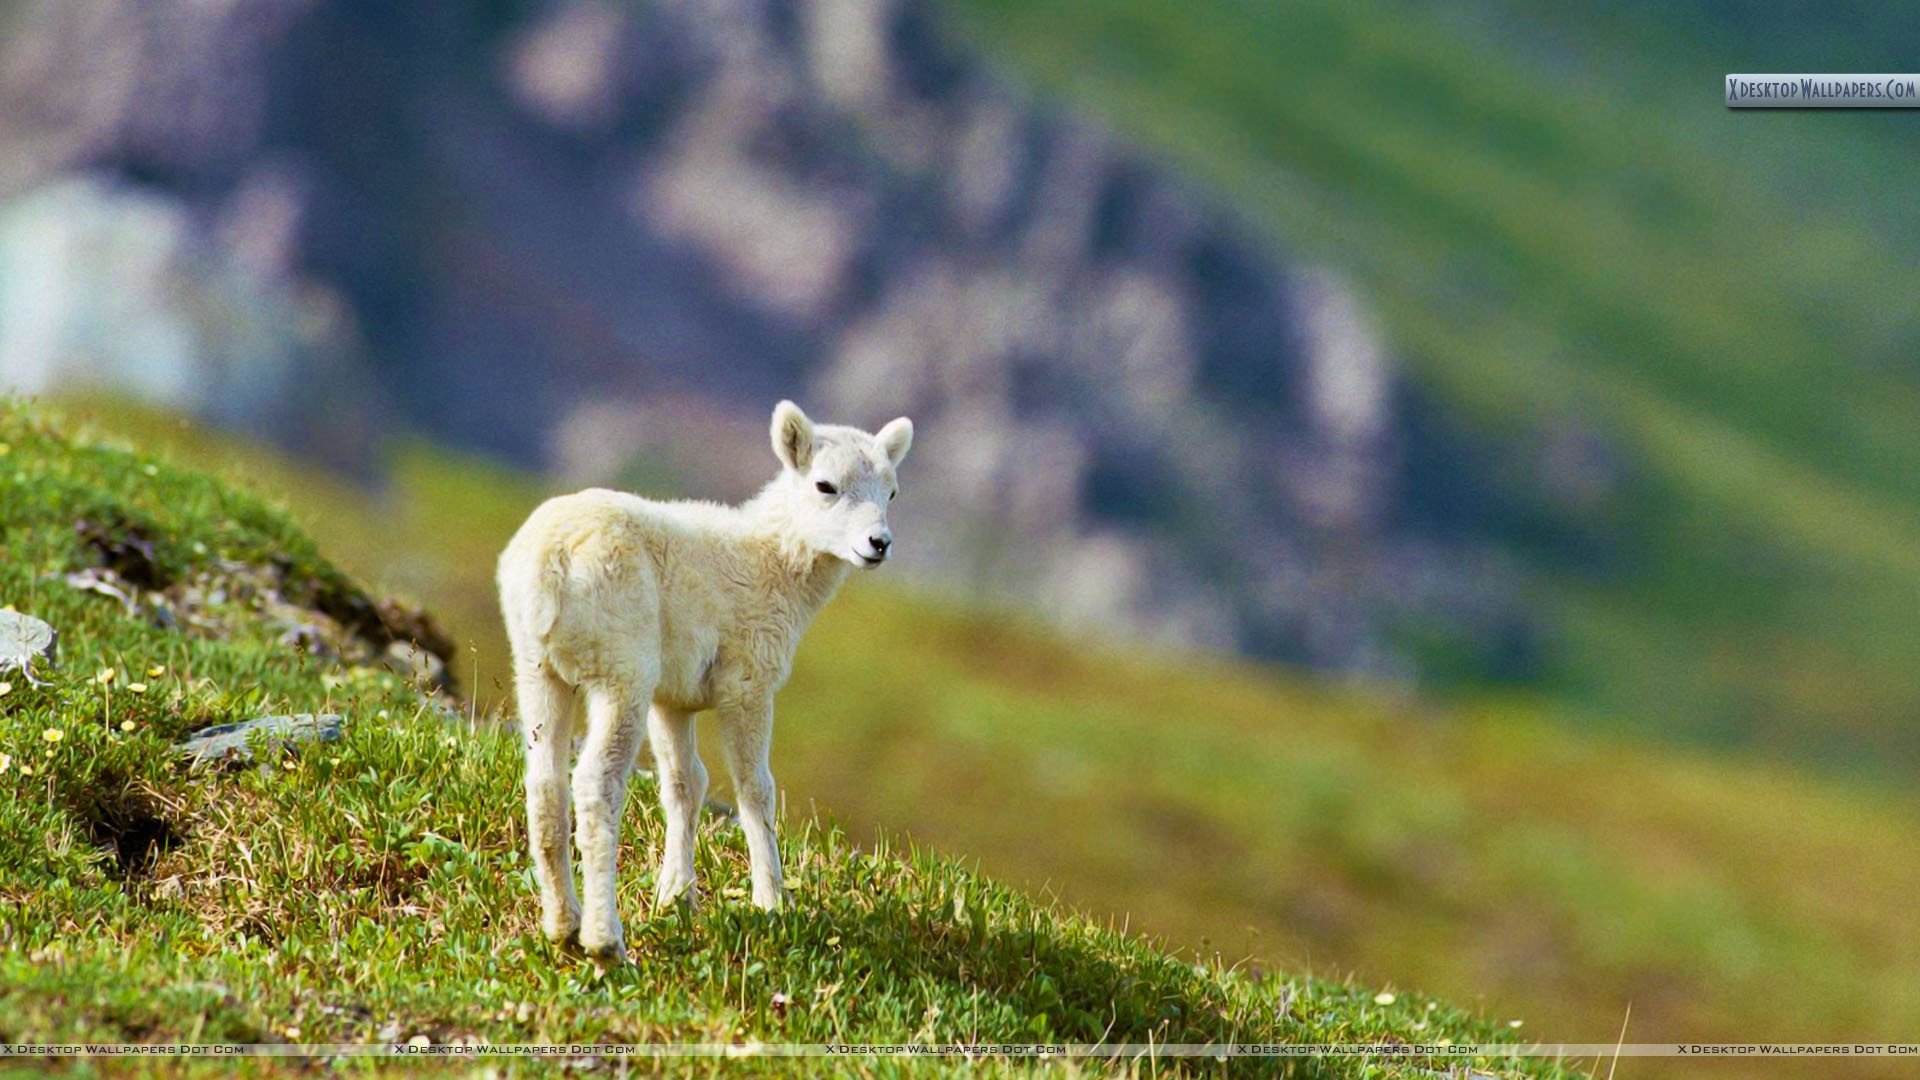 Sheep Image HD Wallpaper And Background Photos